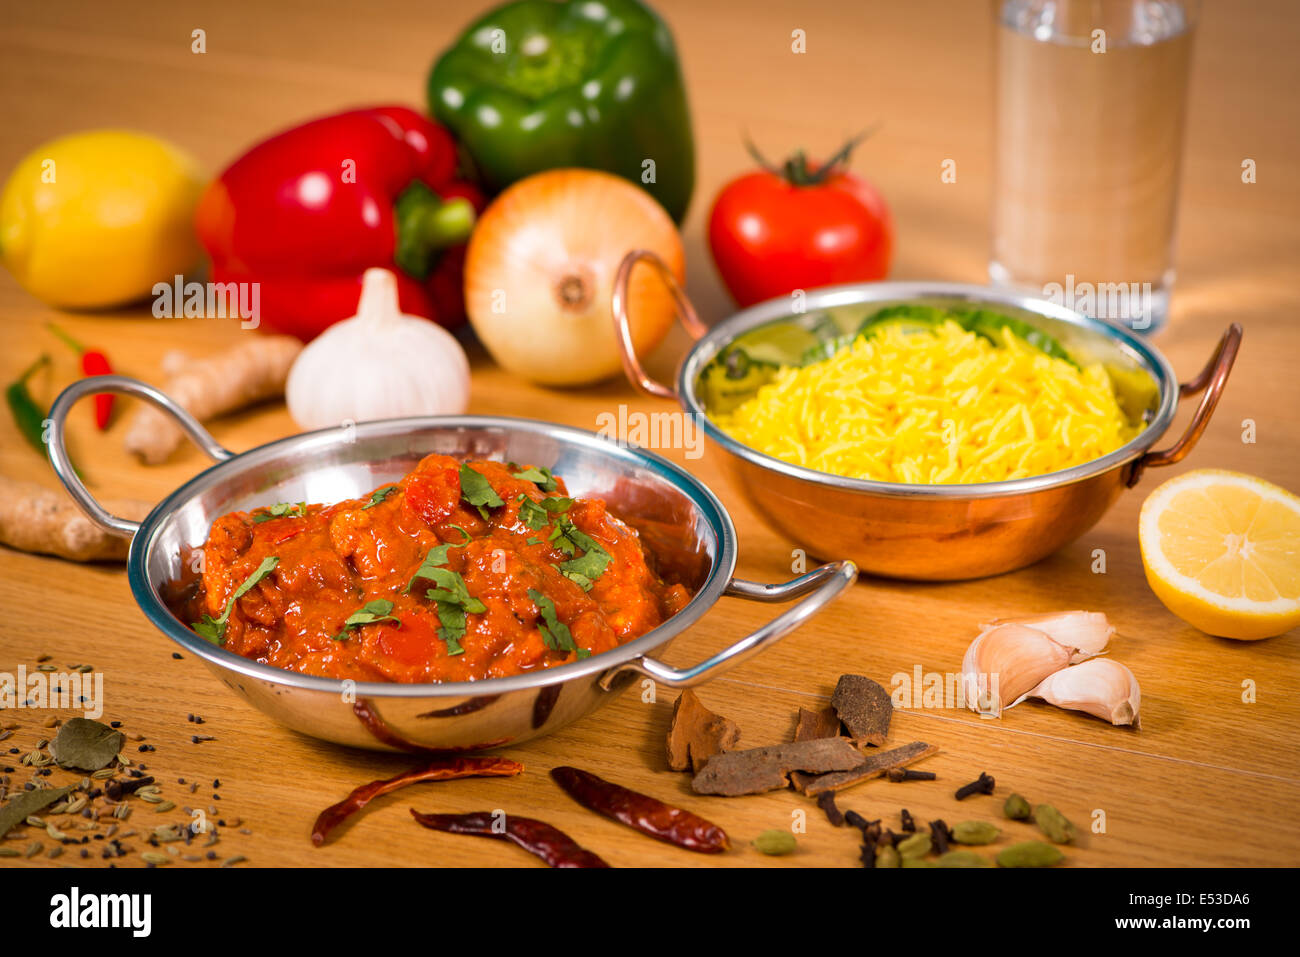 Indian food chicken jalfrezi curry in balti dish decoration set of vegetables Stock Photo